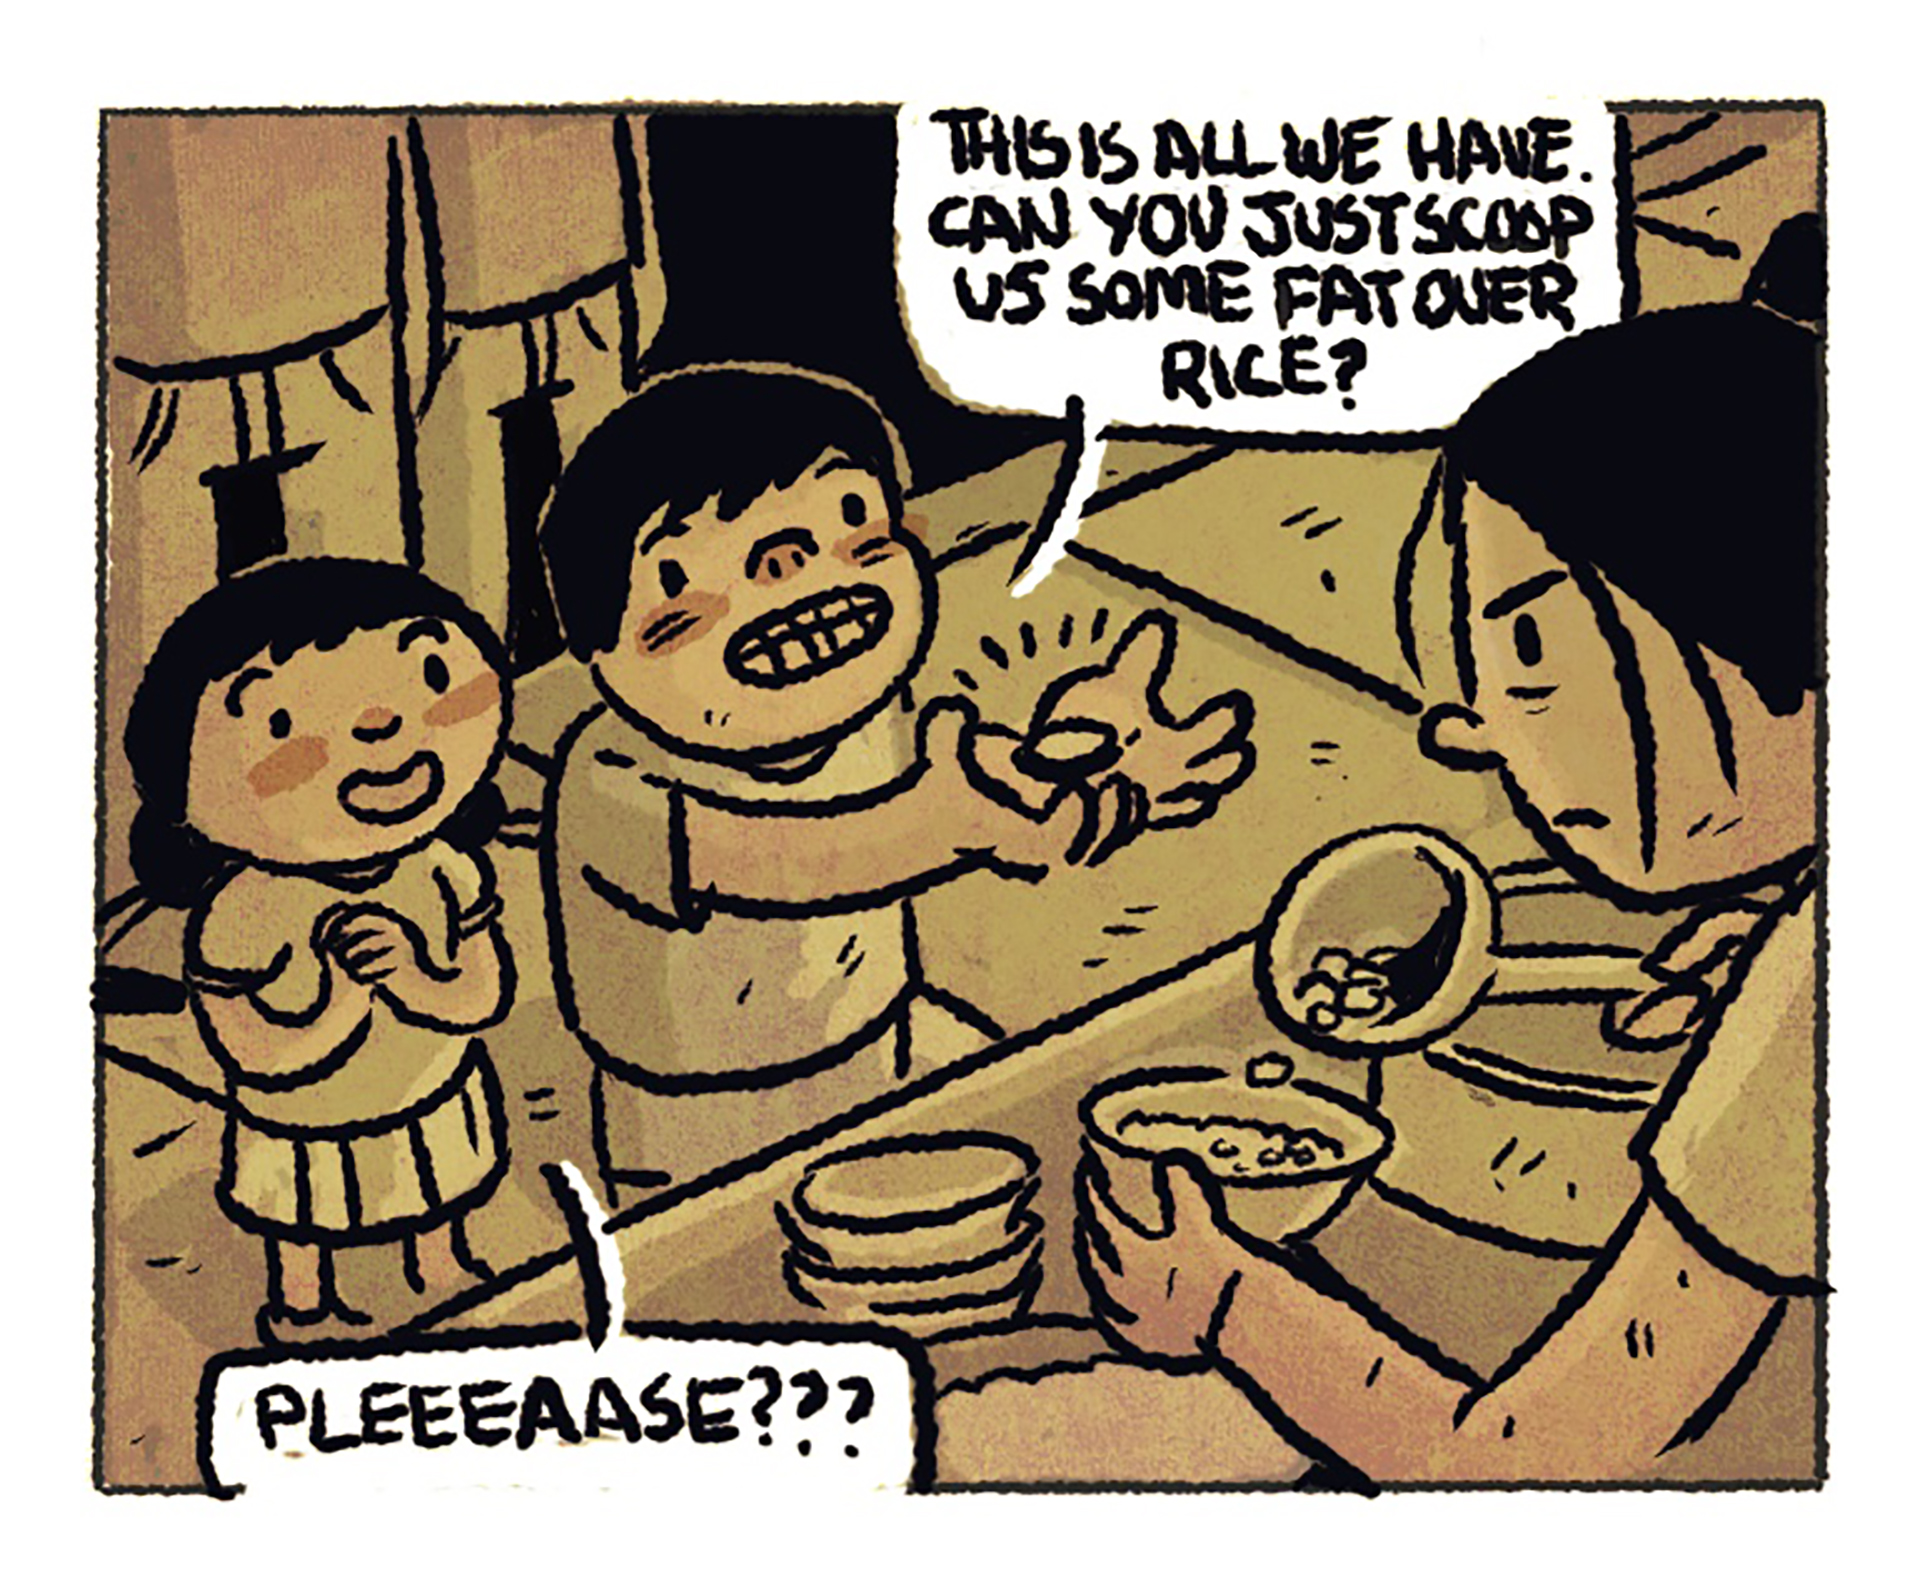 Scene shifts to an even earlier time. A young boy and girl stand in front of a food stall with their arms outstretched while the owner ladles meat onto a bowl of rice. Speech bubble 1: "This is all we have. Can you just scoop us some fat over rice?" Speech bubble #2: "PLEEEAASE???" 